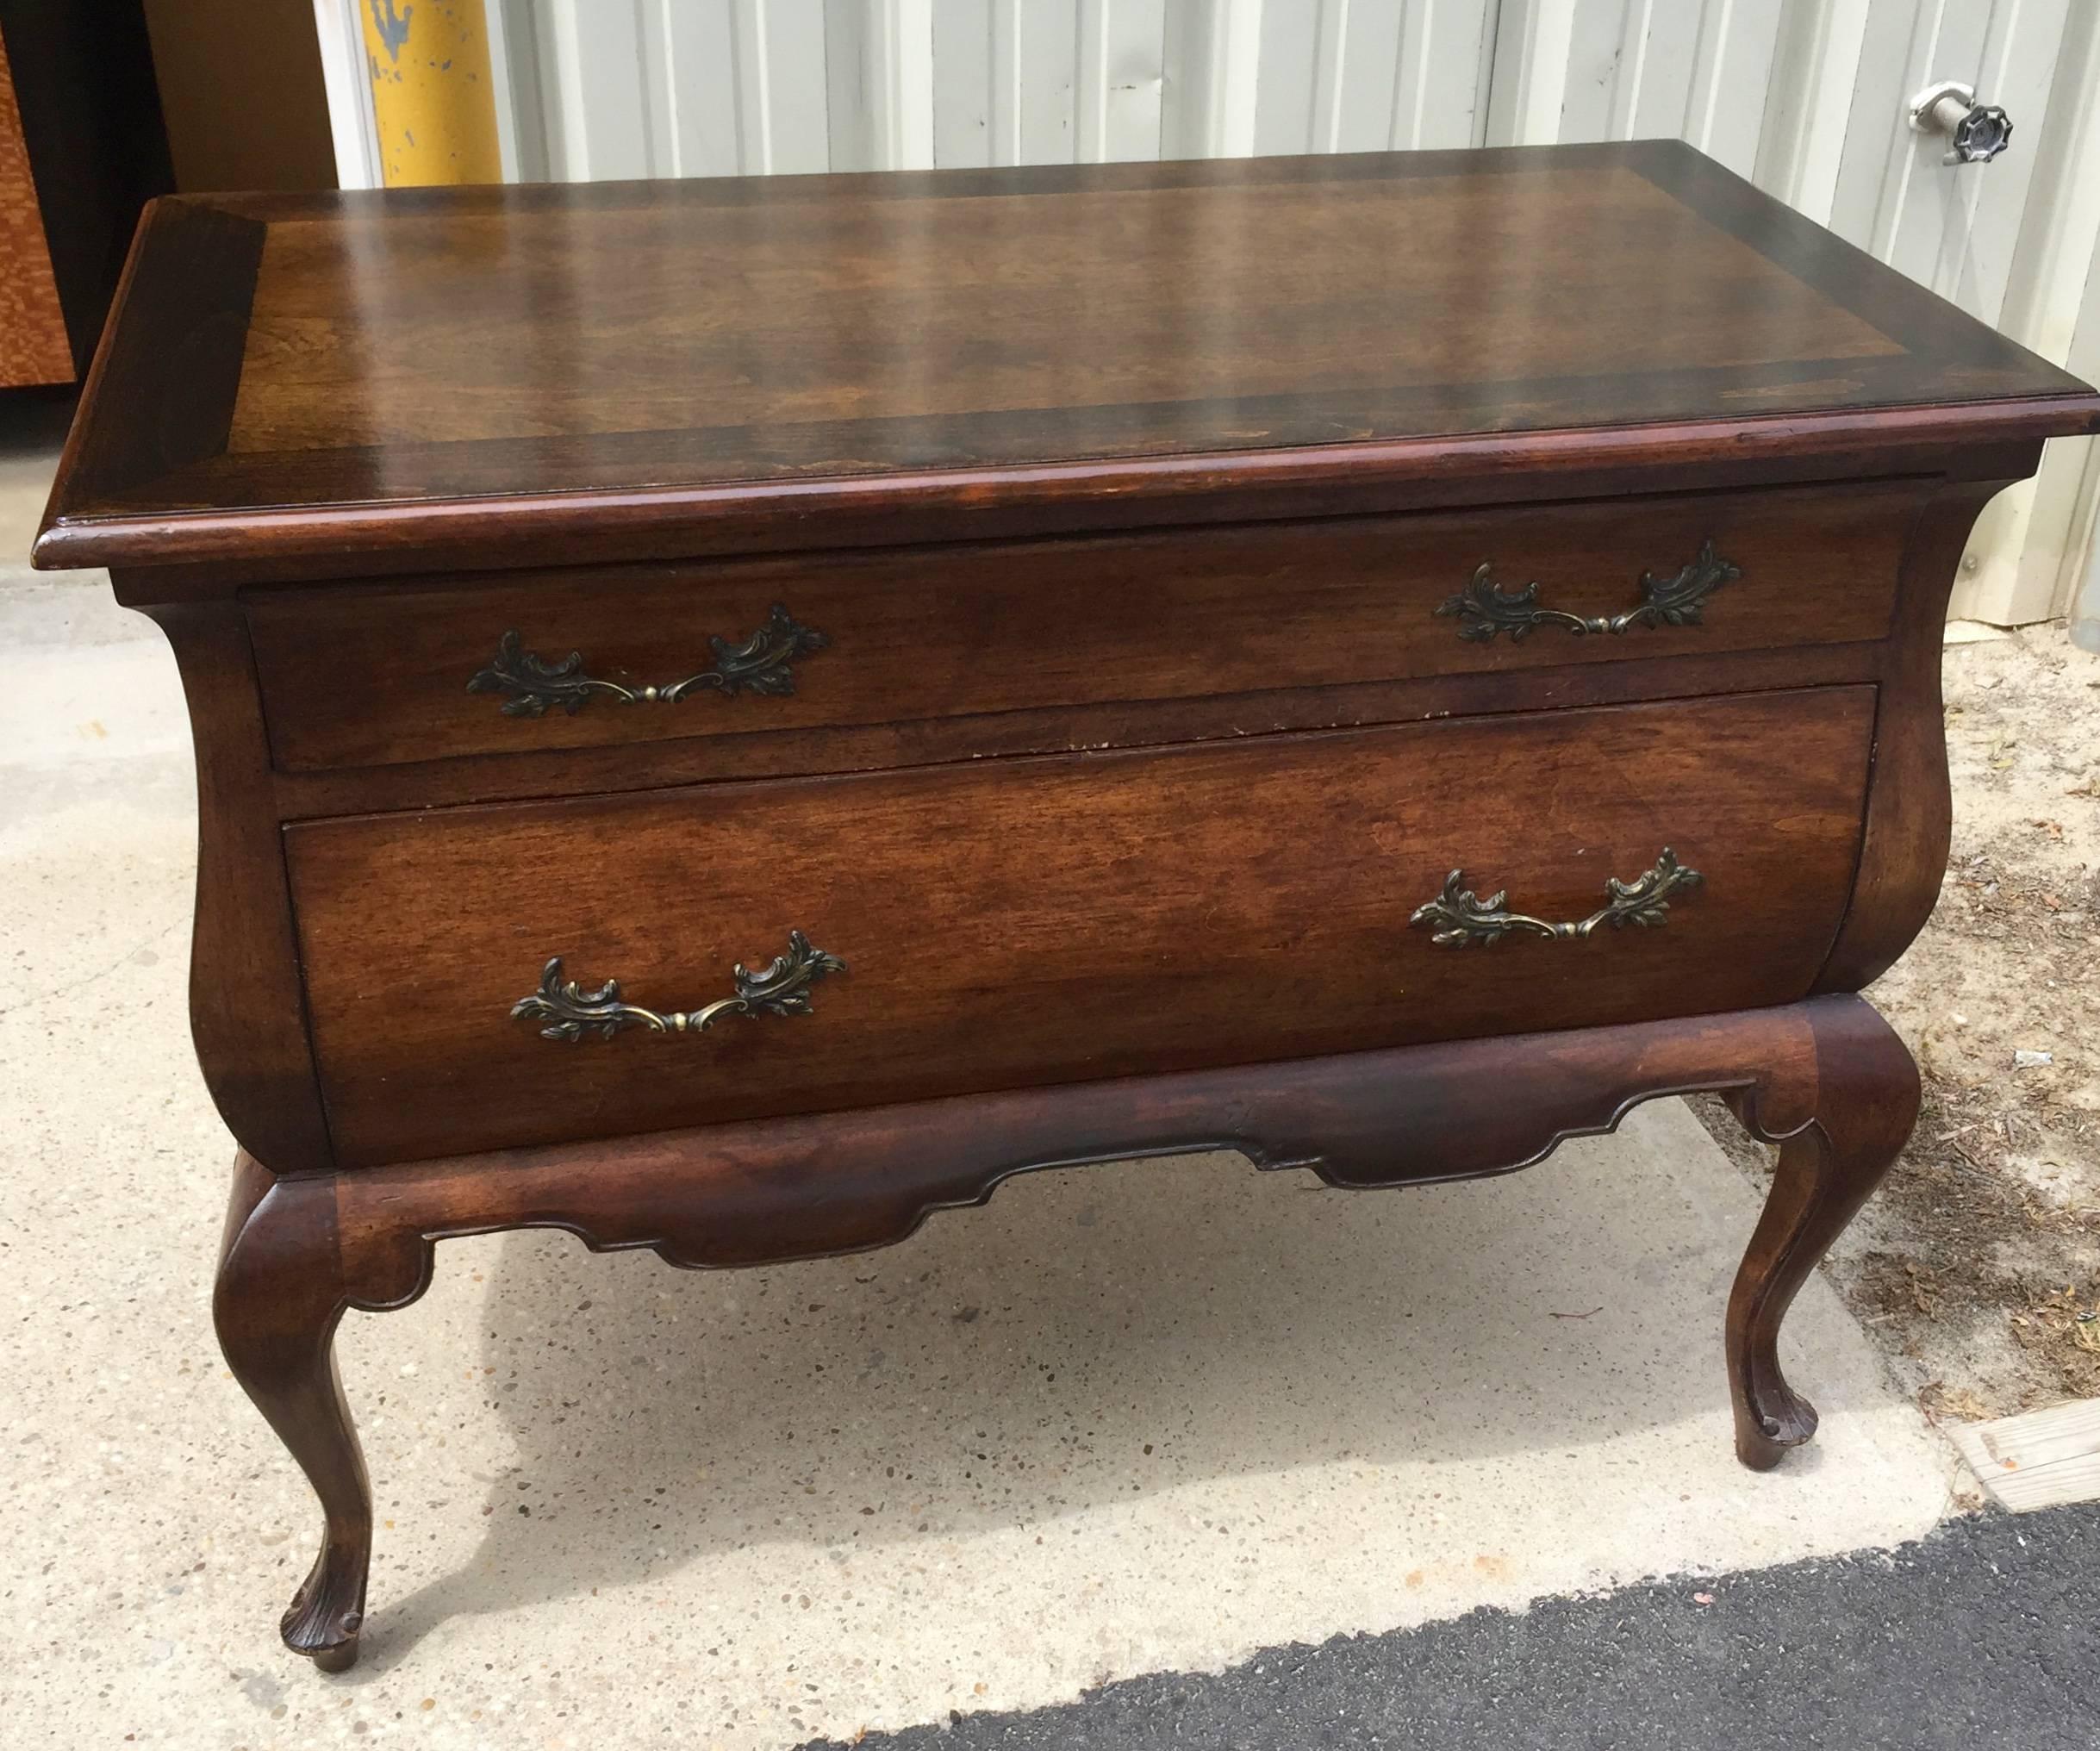 Decorative and functional, this pair of cabinets would work well as sofa end tables or as nightstands. They are walnut with a banded top in a darker inlay.